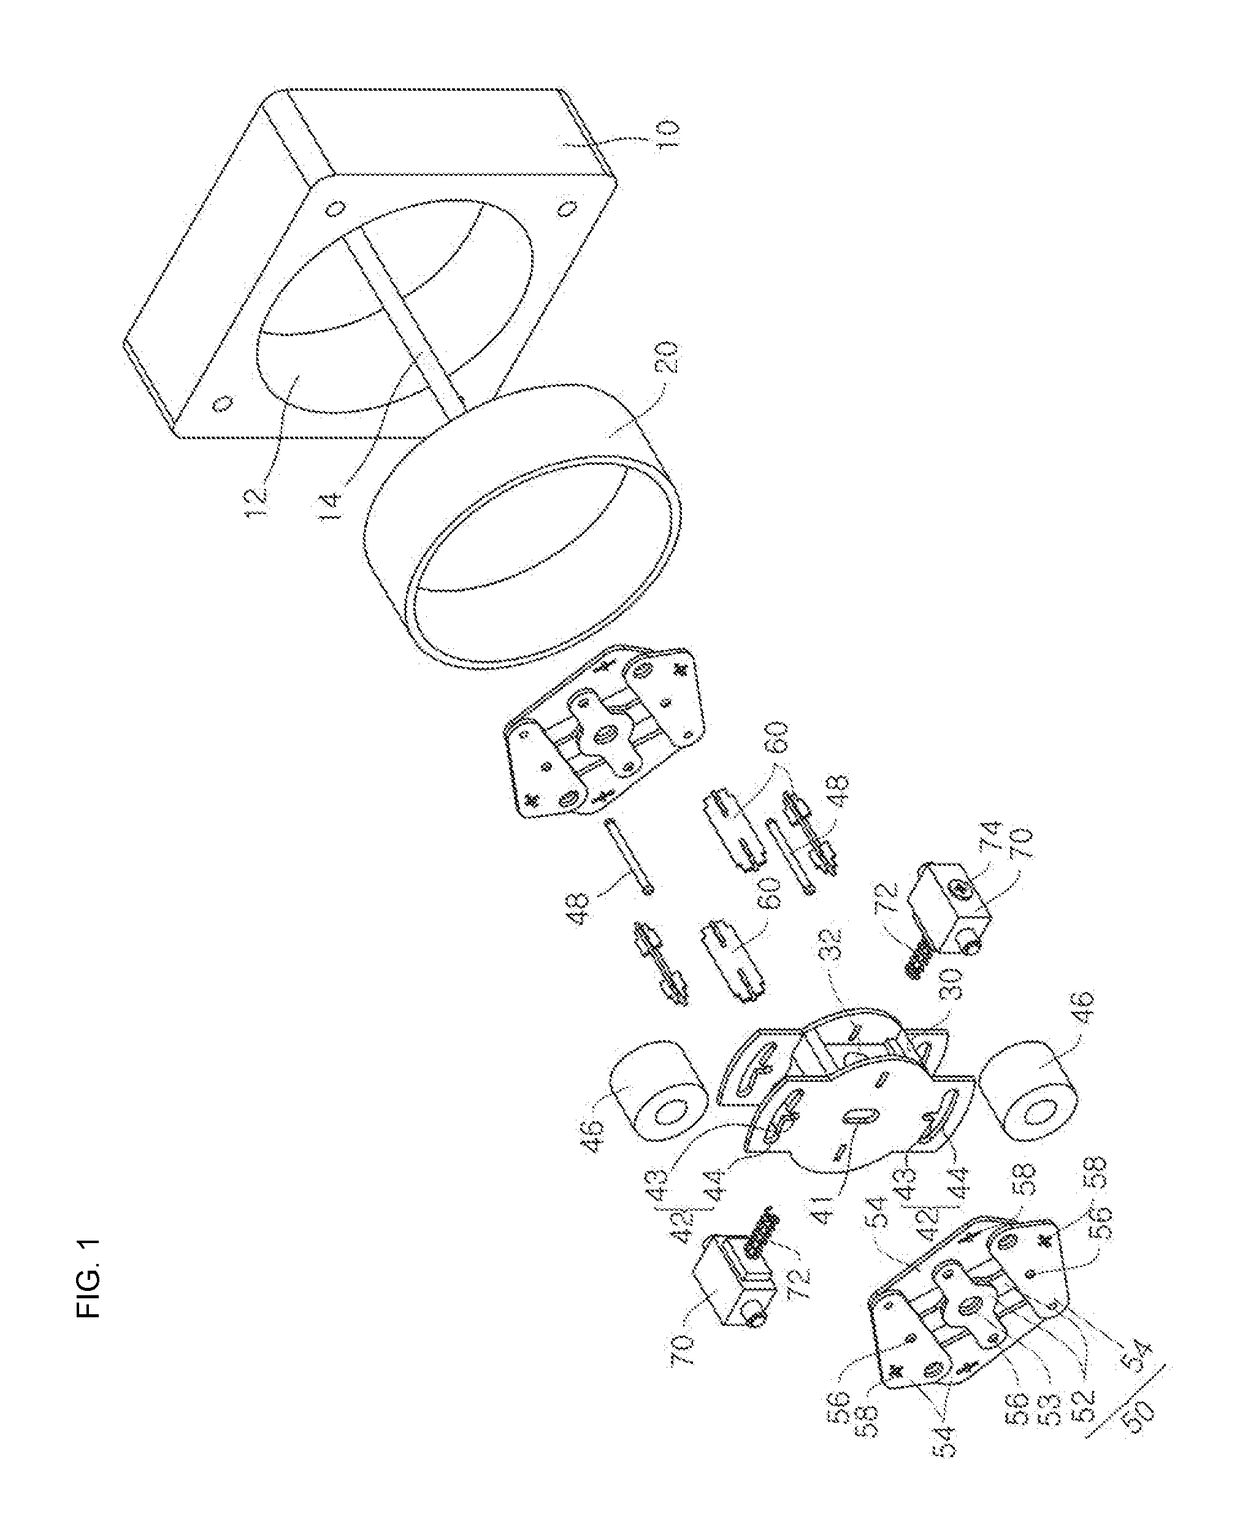 Non-powered passive braking device using centrifugal force